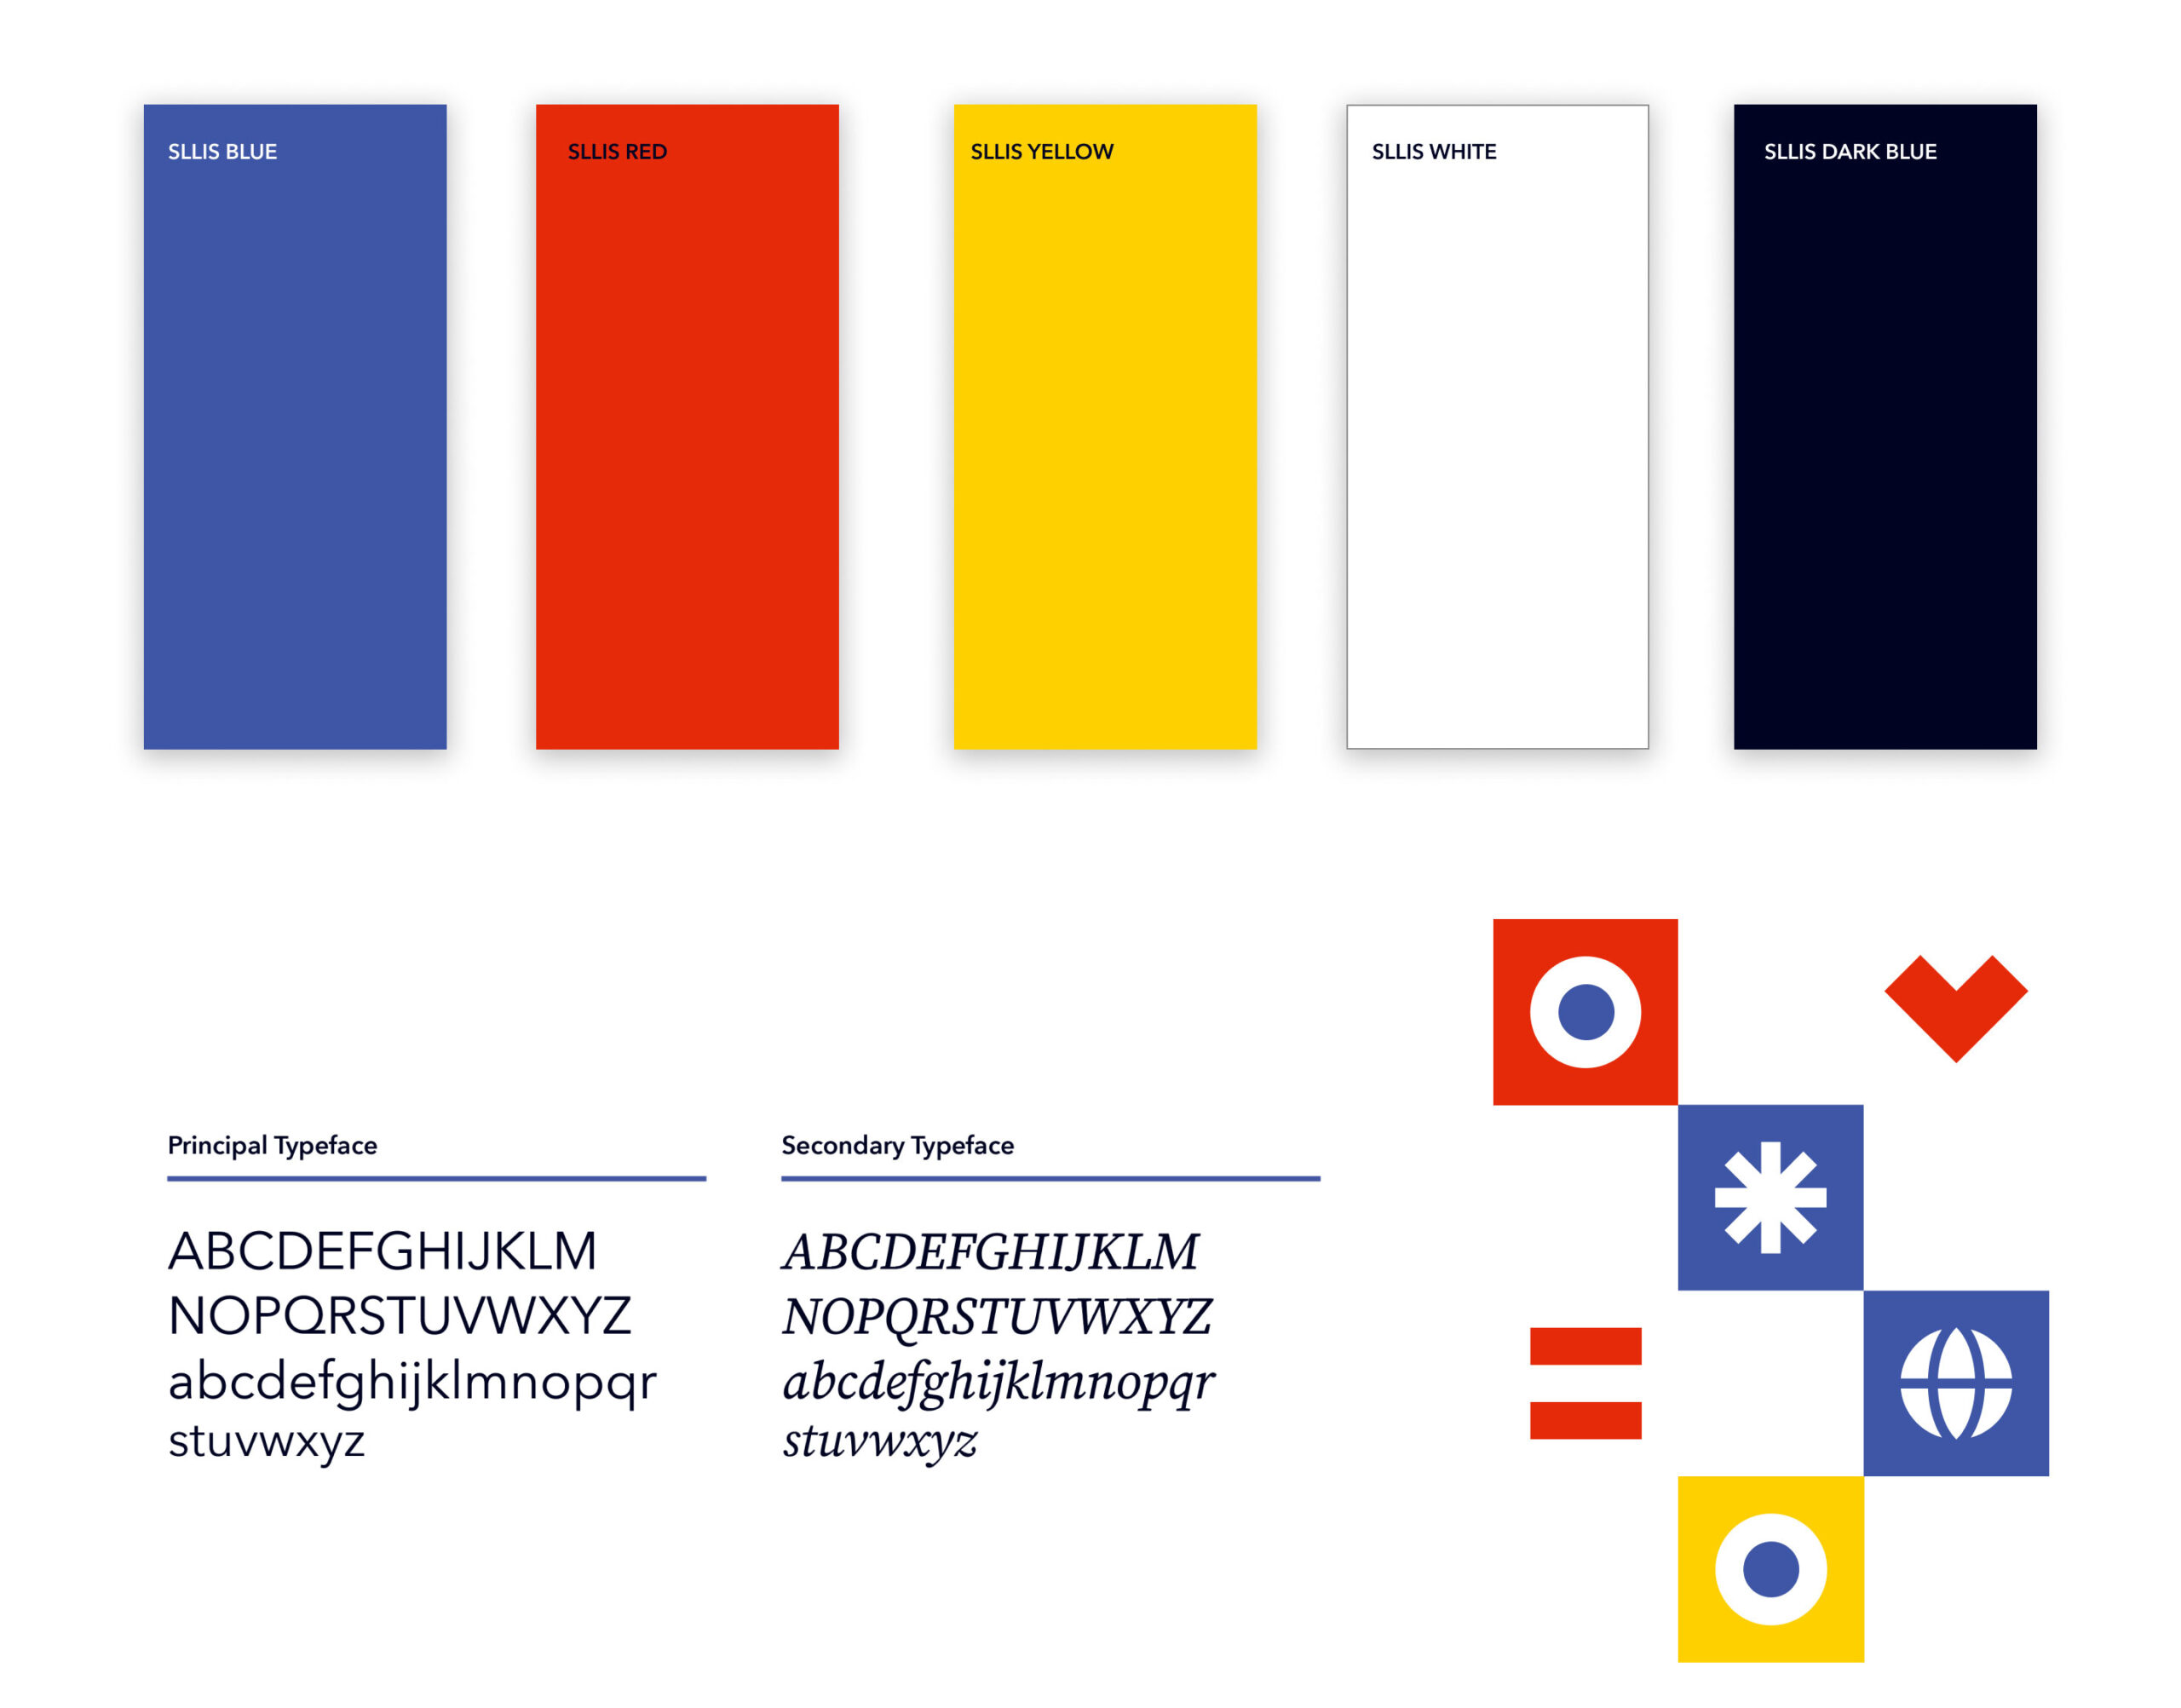 St. Louis Language Immersion School brand colors, fonts and icons